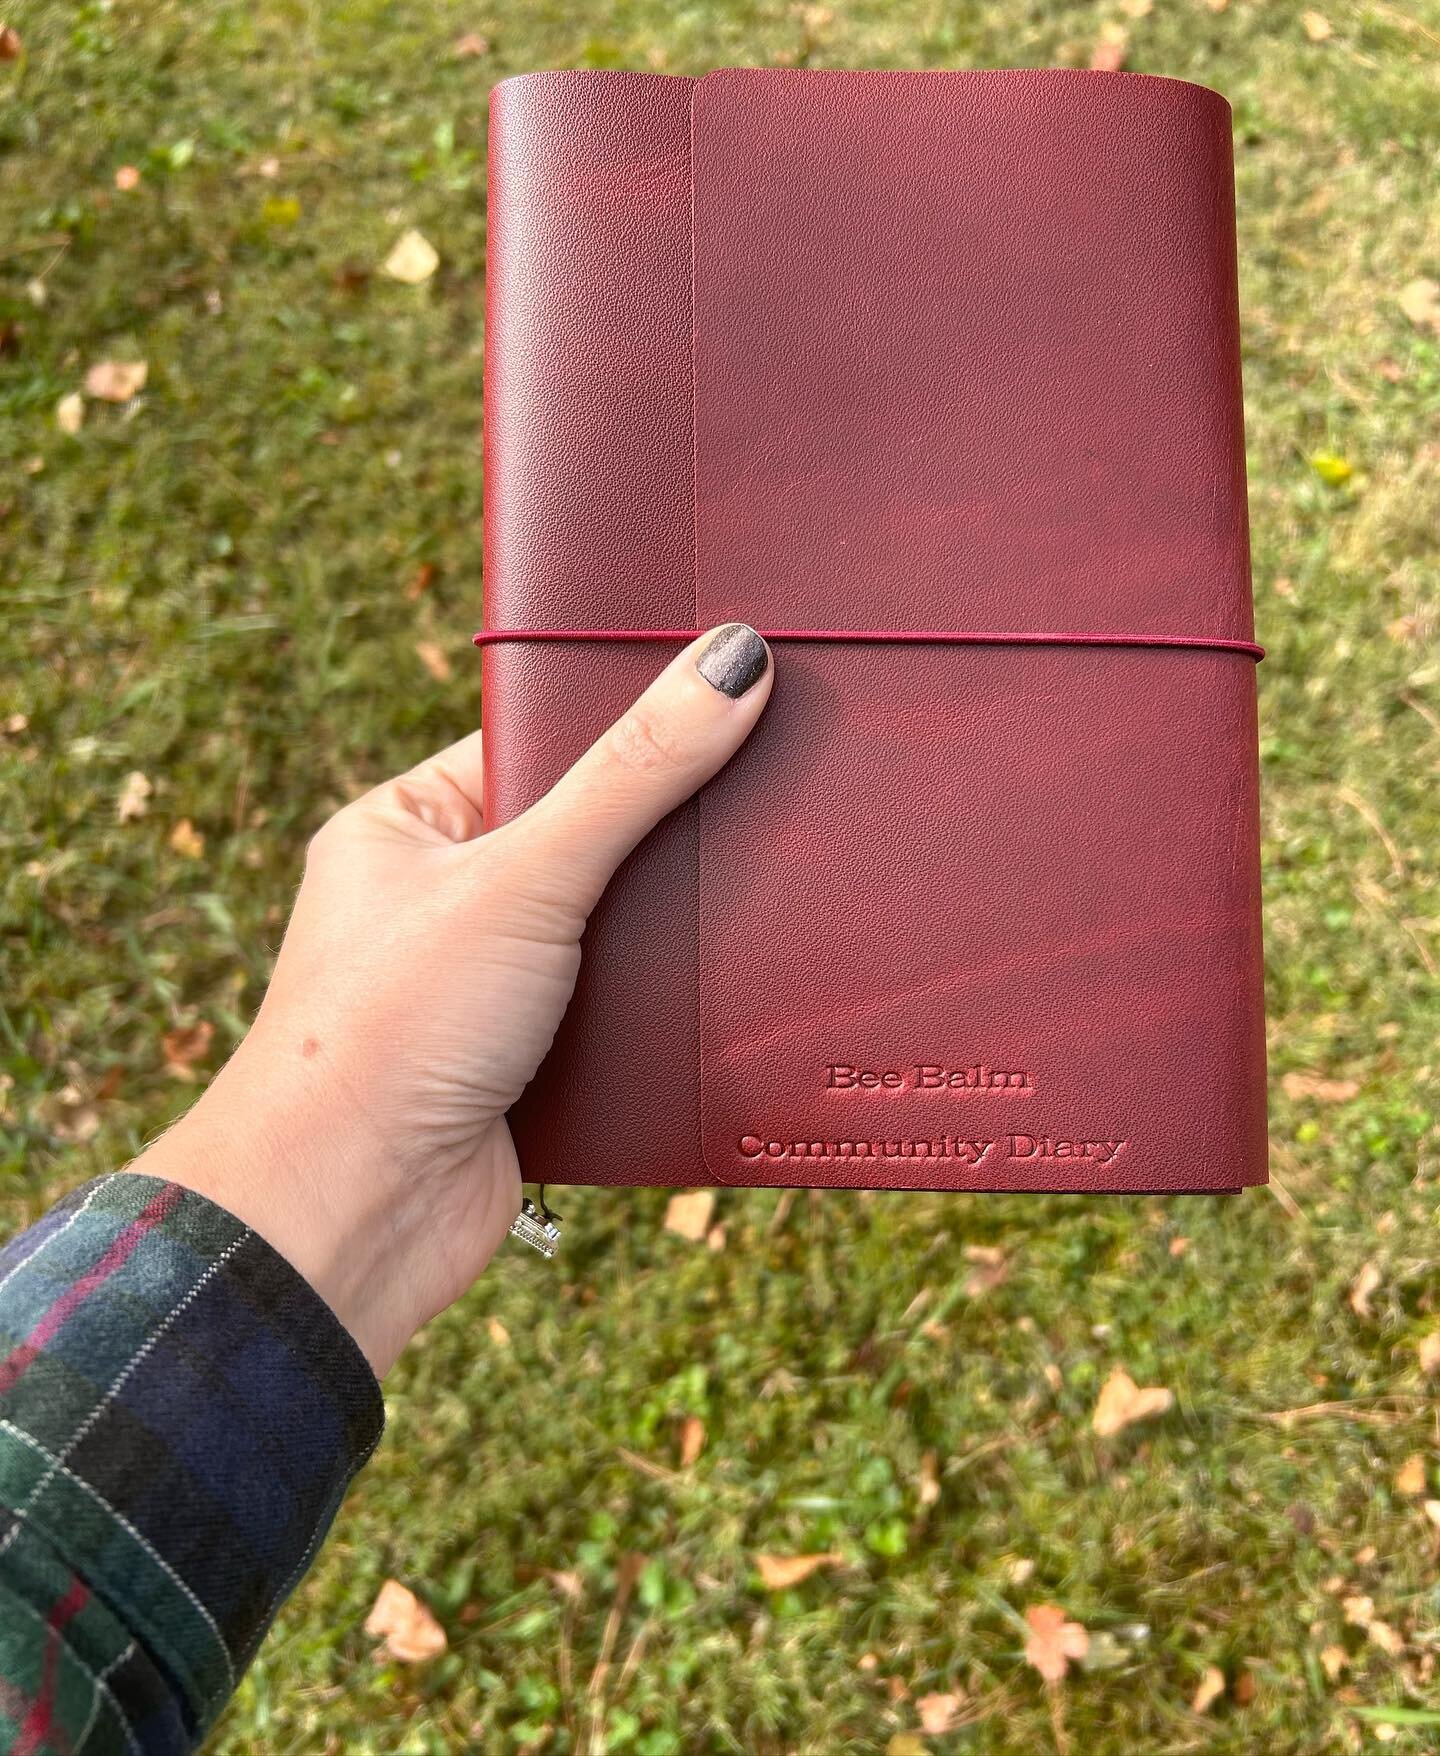 Poems, secrets, musings, and little knock-knock jokes wanted. 💌

So, so excited to share this little @pinkhousehq reading room treat with you. 🍬 This is our @beebalmarkansas community diary, lovingly handcrafted by Lesha at @littlebindery. Our comm